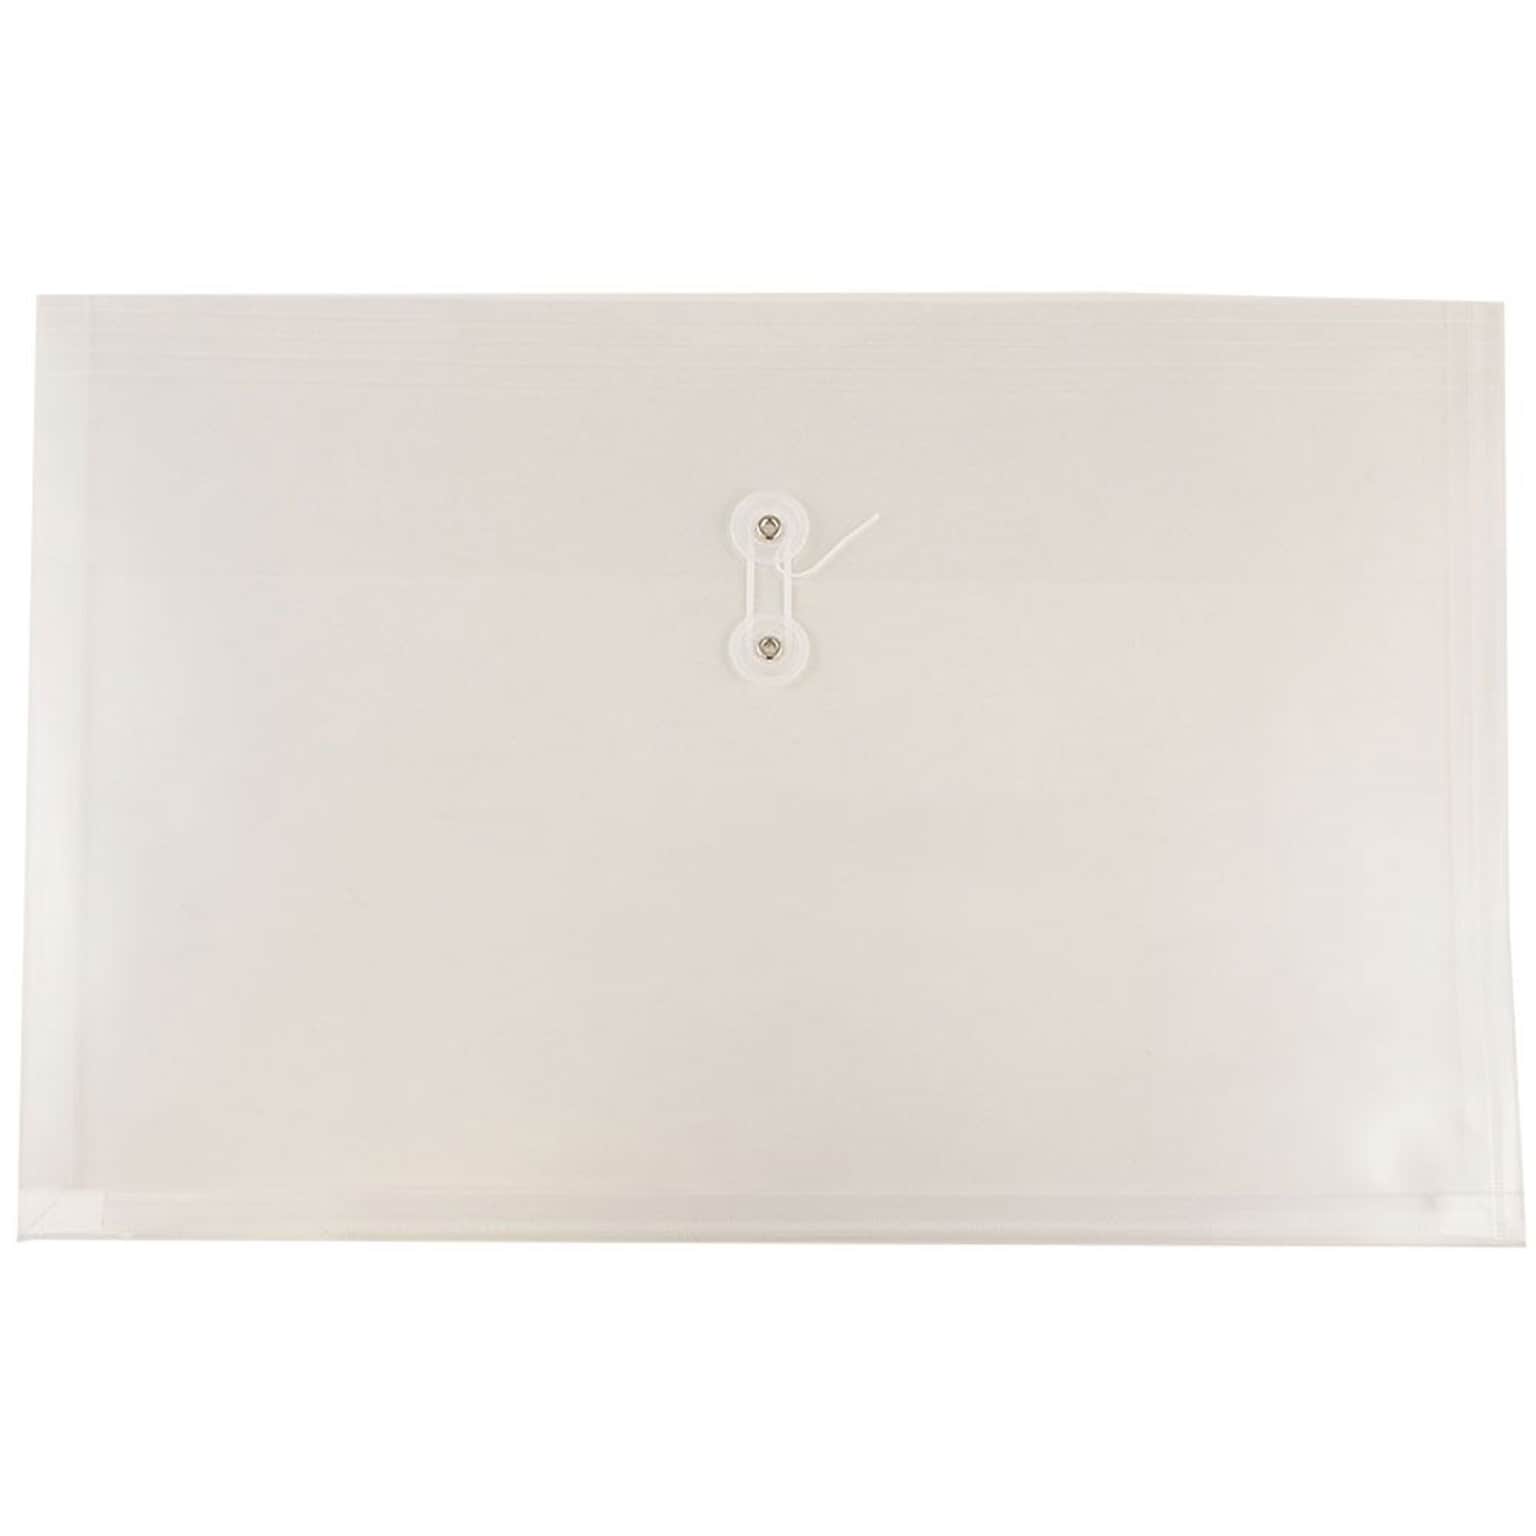 JAM Paper® Plastic Envelopes with Button and String Tie Closure, Large Booklet, 12 x 18, Clear, 12/Pack (457B1CL)